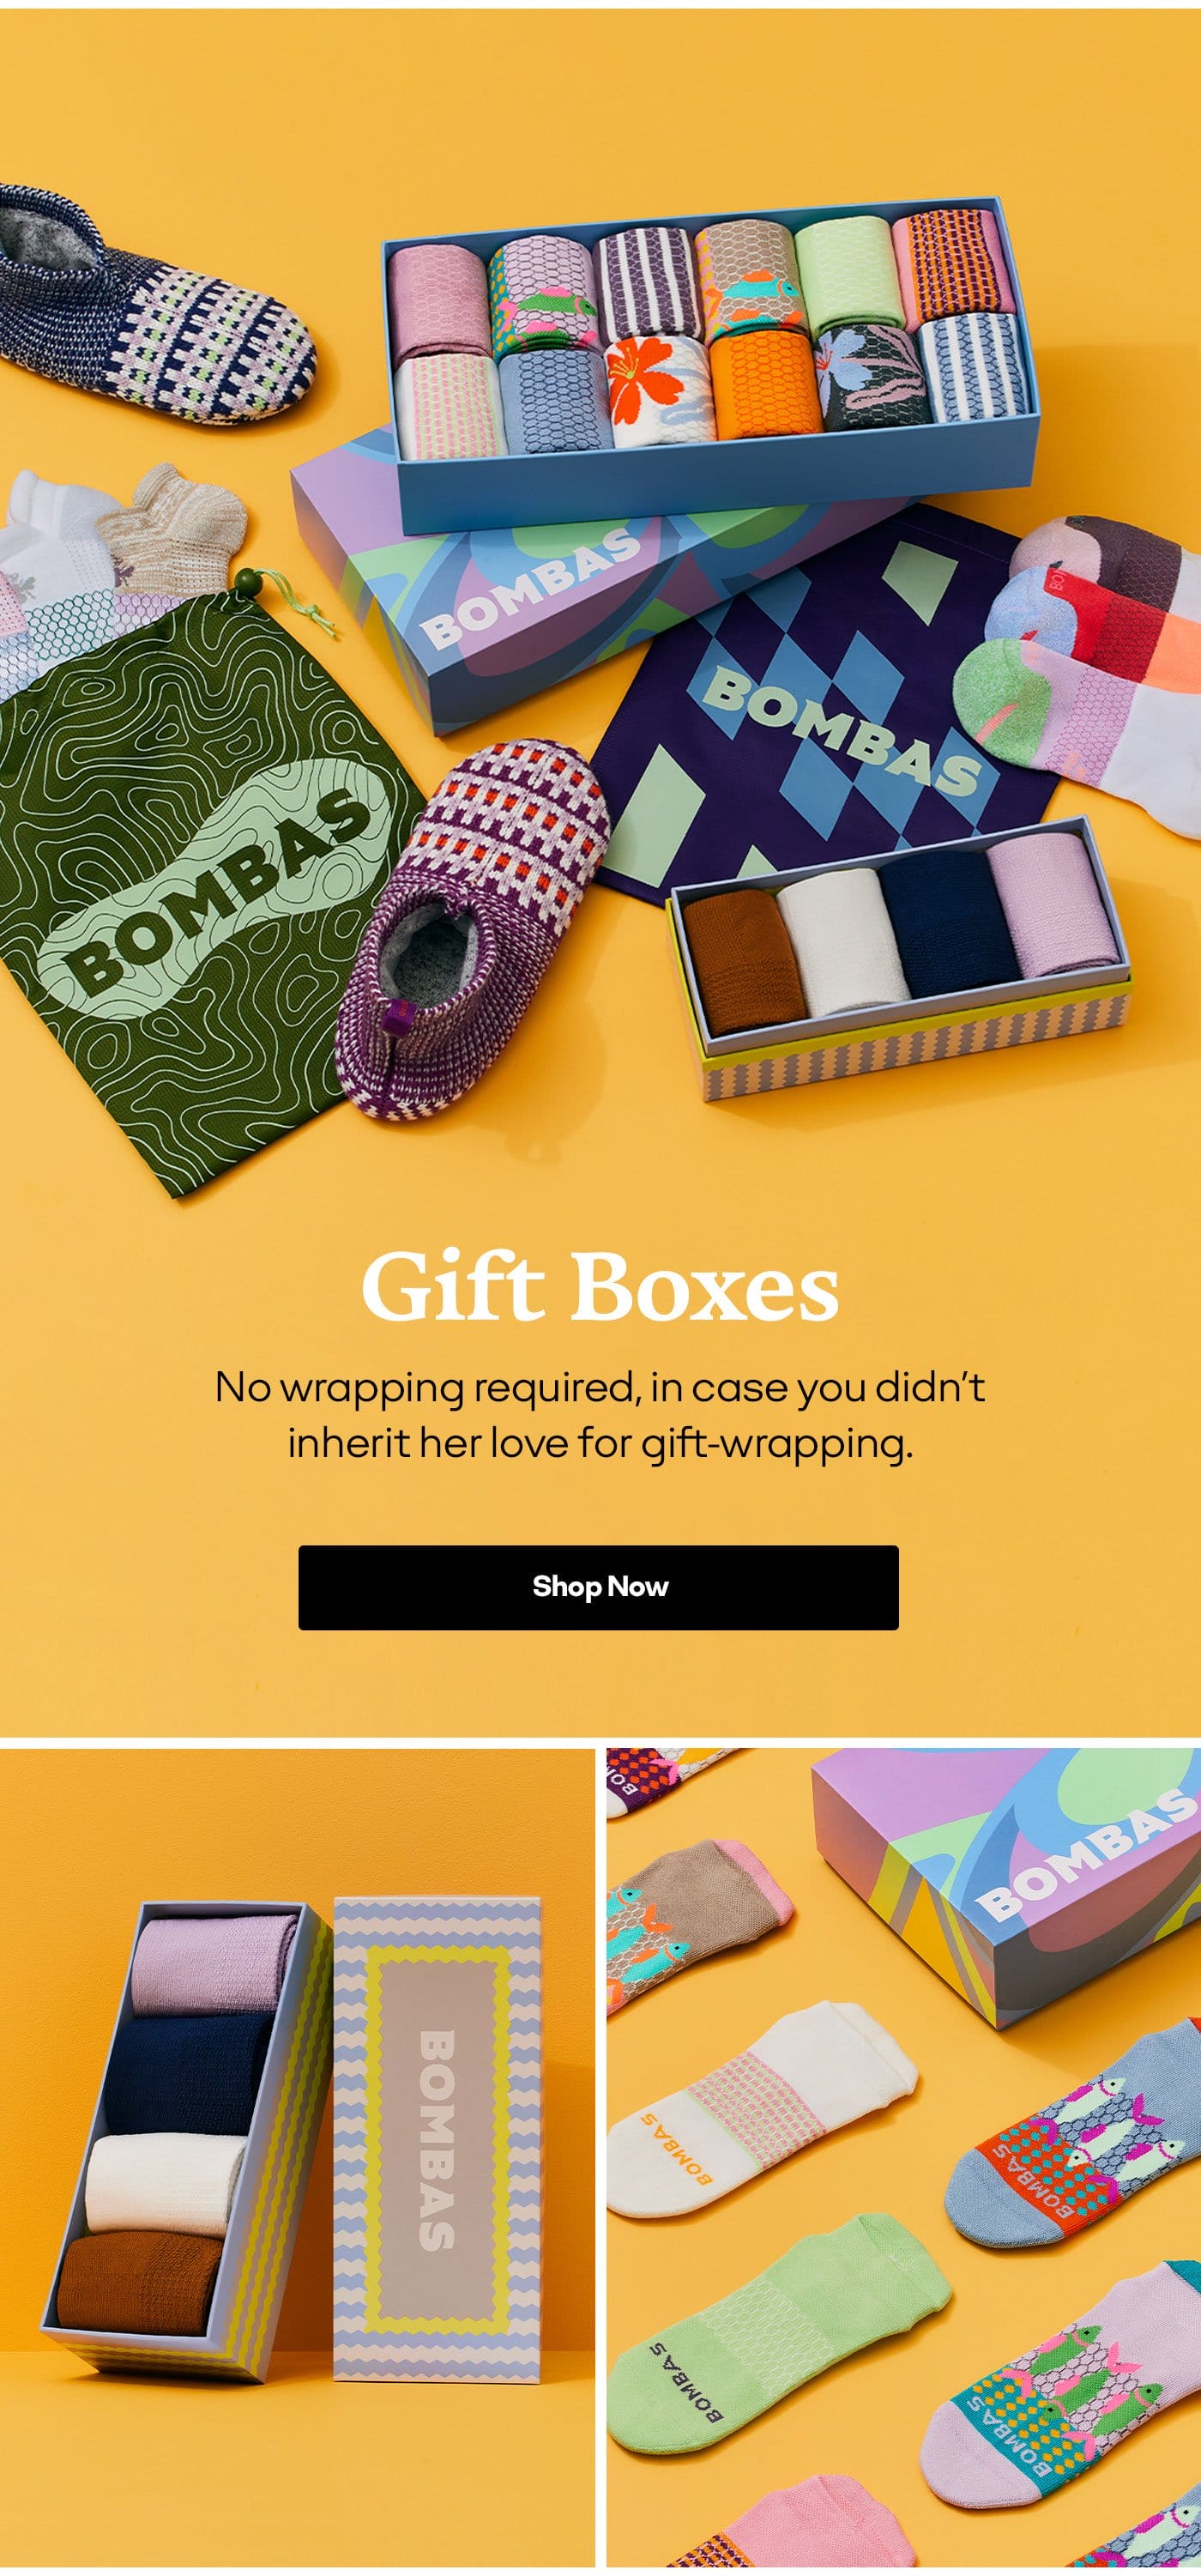 Gift Boxes | No wrapping required, in case you didn't inherit her love for gift-wrapping. | SHOP NOW